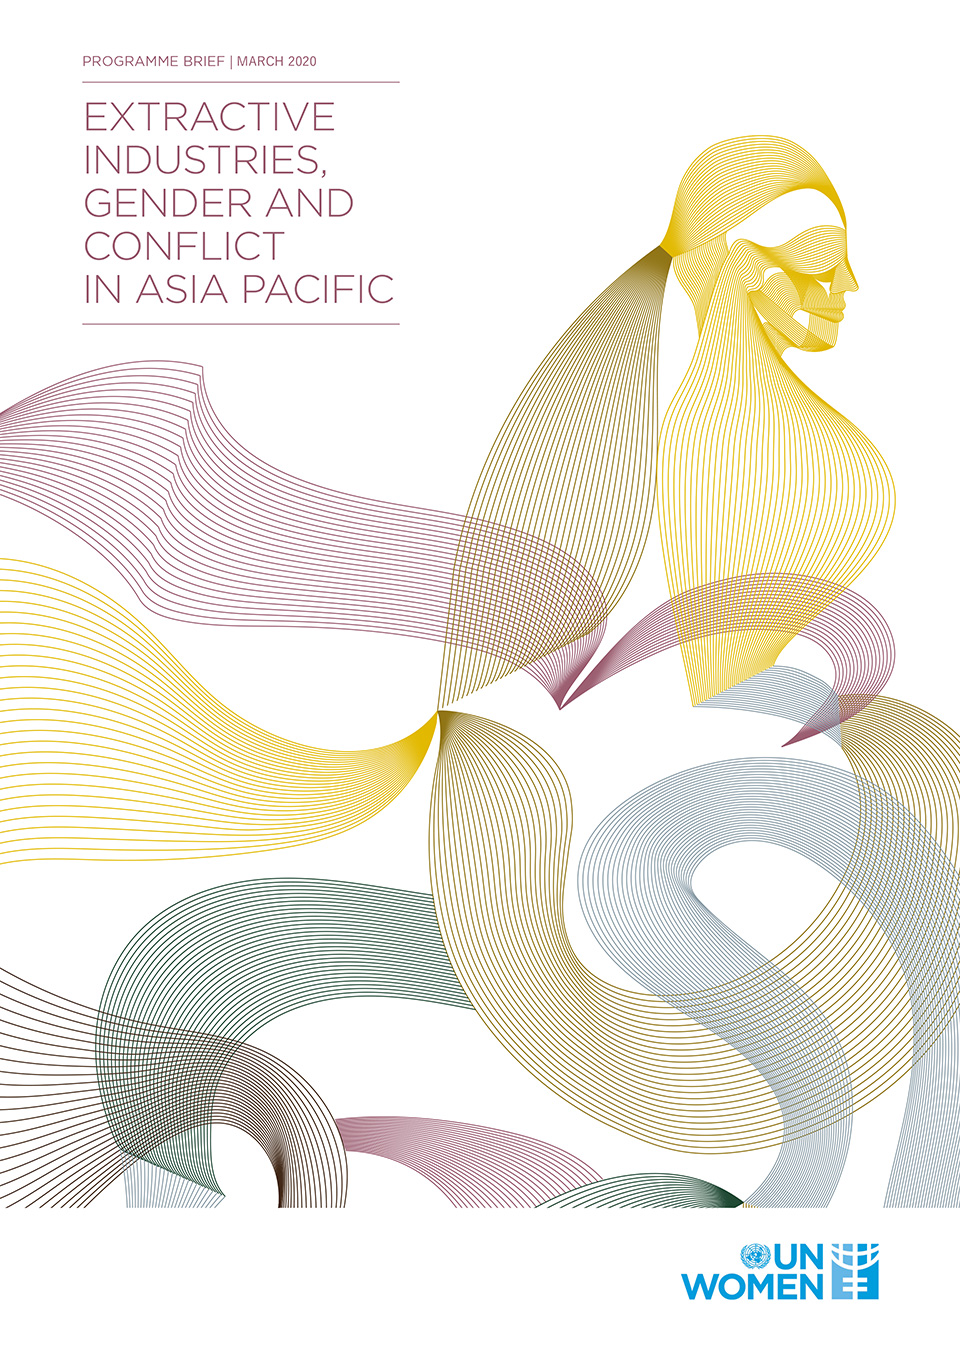 Programme Brief: Extractive Industries, Gender and Conflict in Asia Pacific